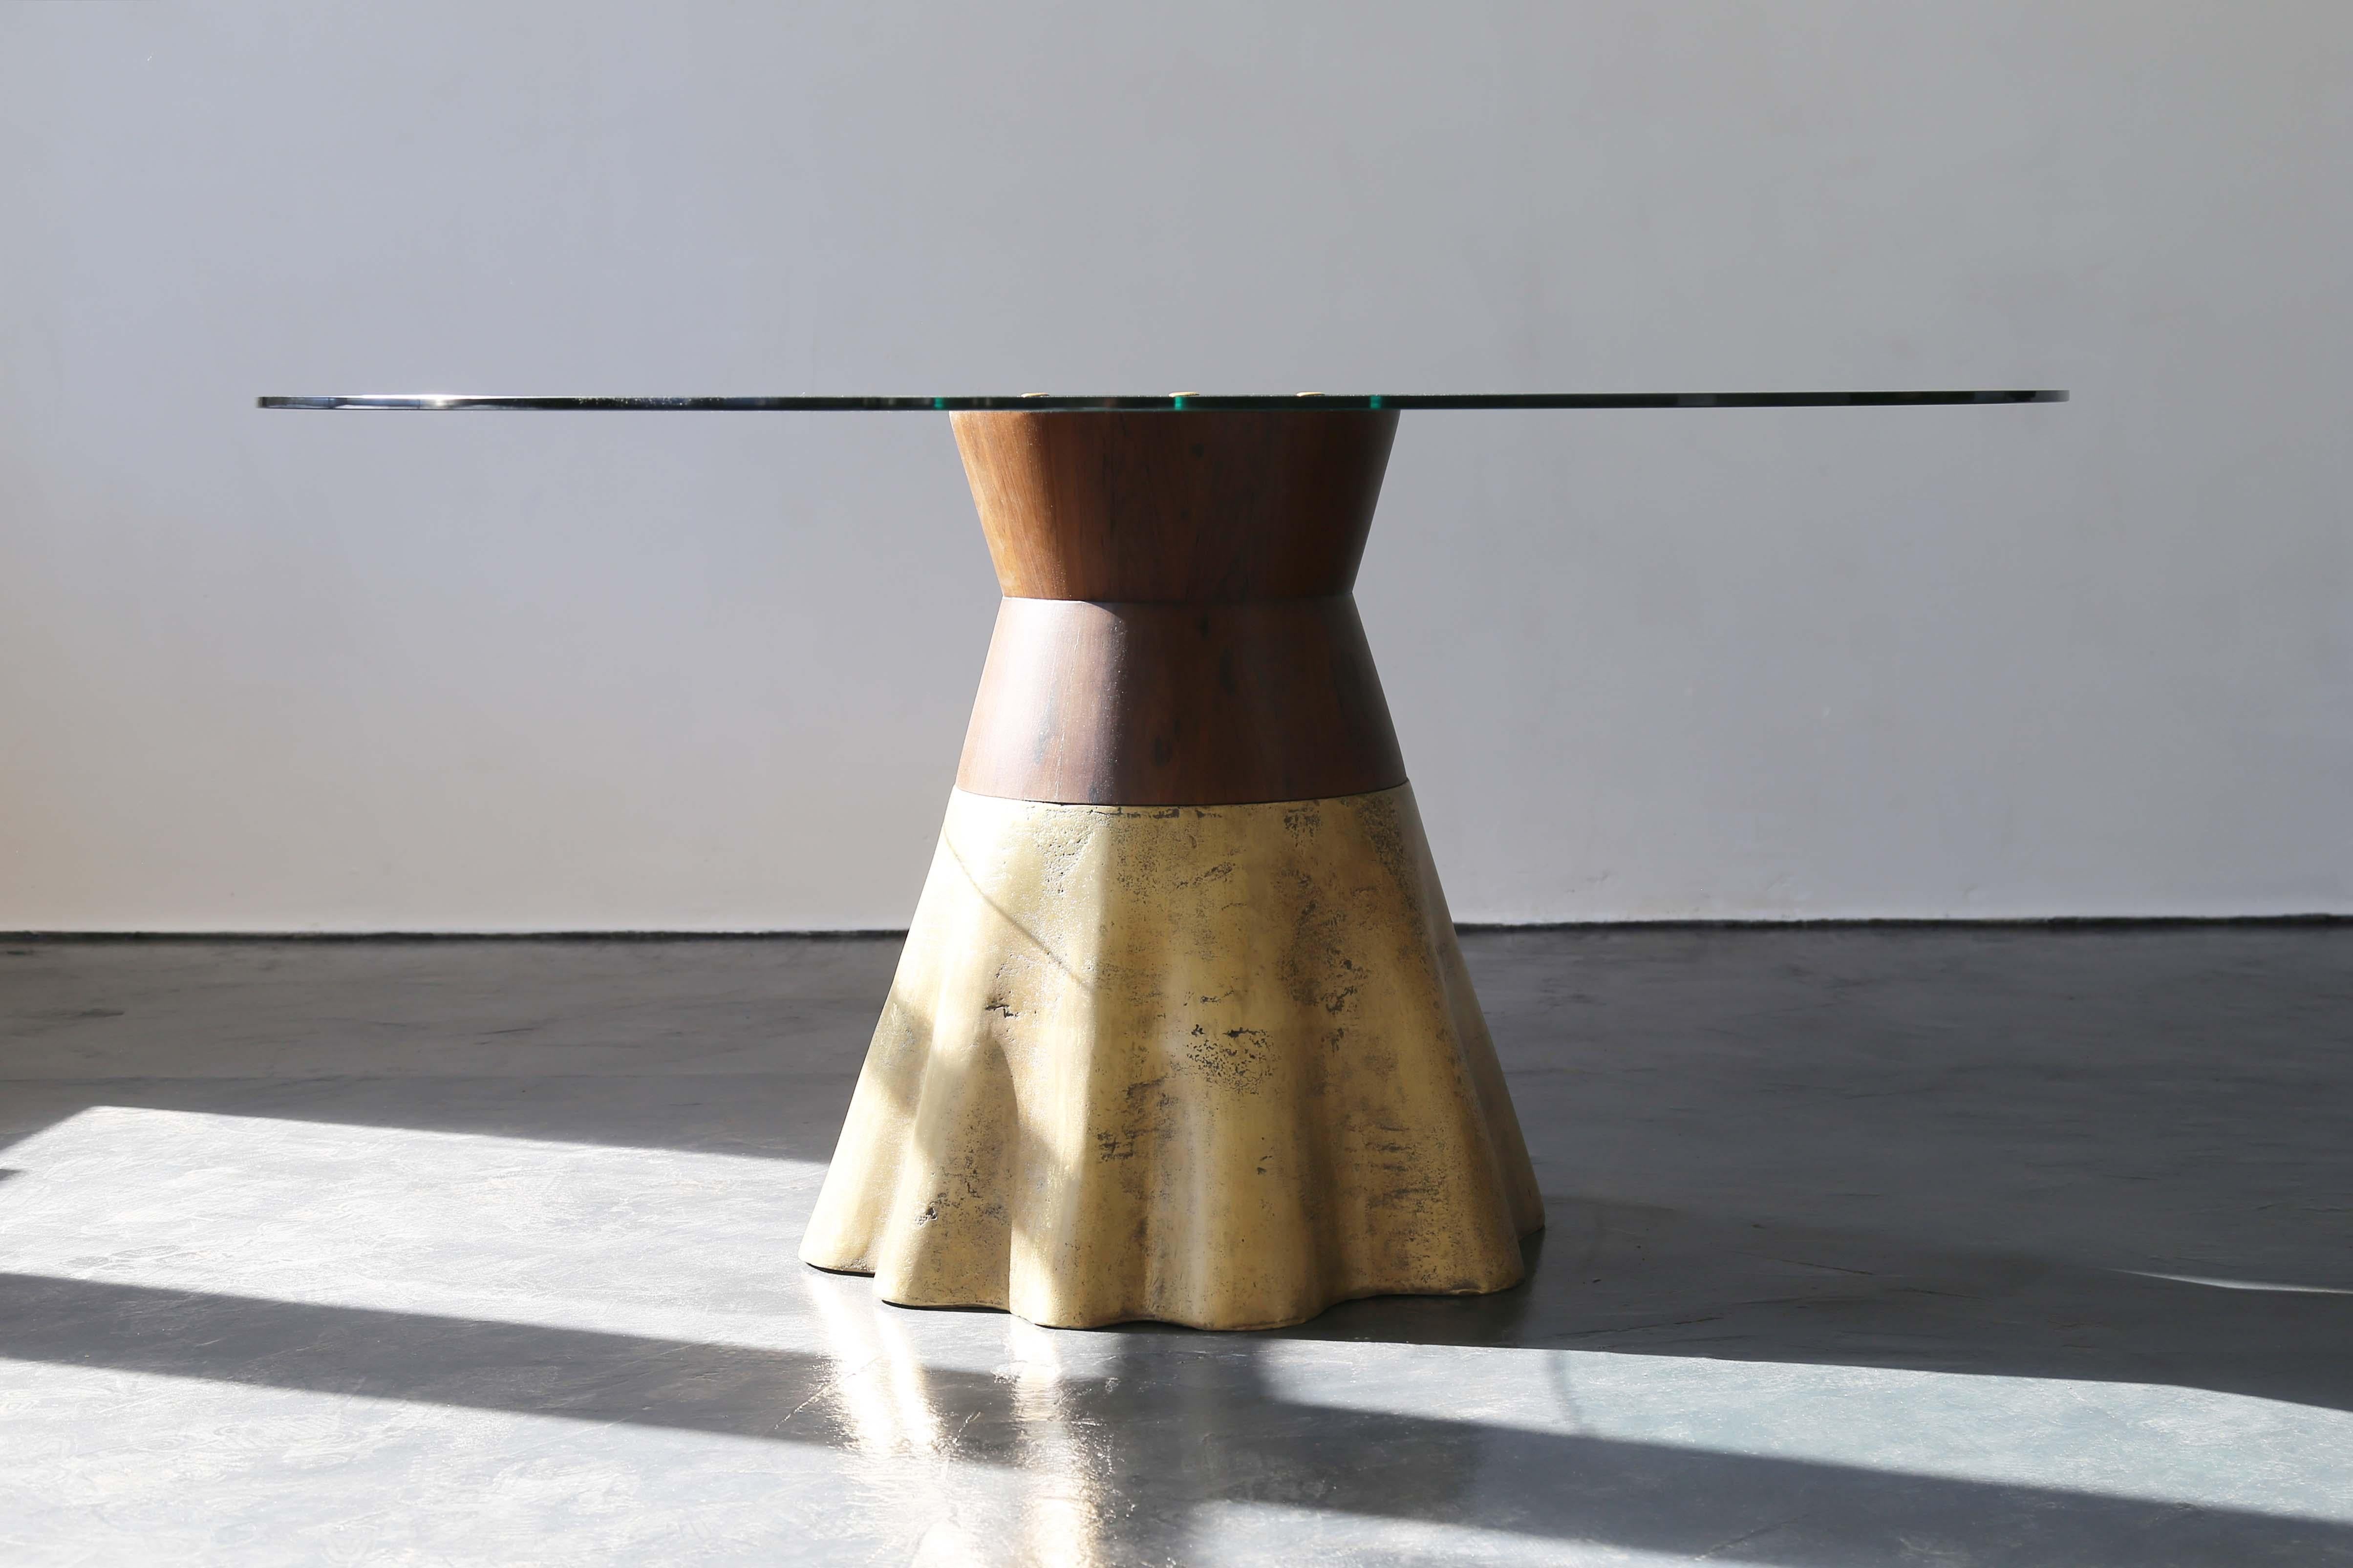 The Tavola 9 features a seemingly organic, wavy cast bronze base joined to a rigid, conical wood support and shown here with a glass top.  Only partially polished to show the evidence of the burnt earth that once surrounded the bronze, no two bases